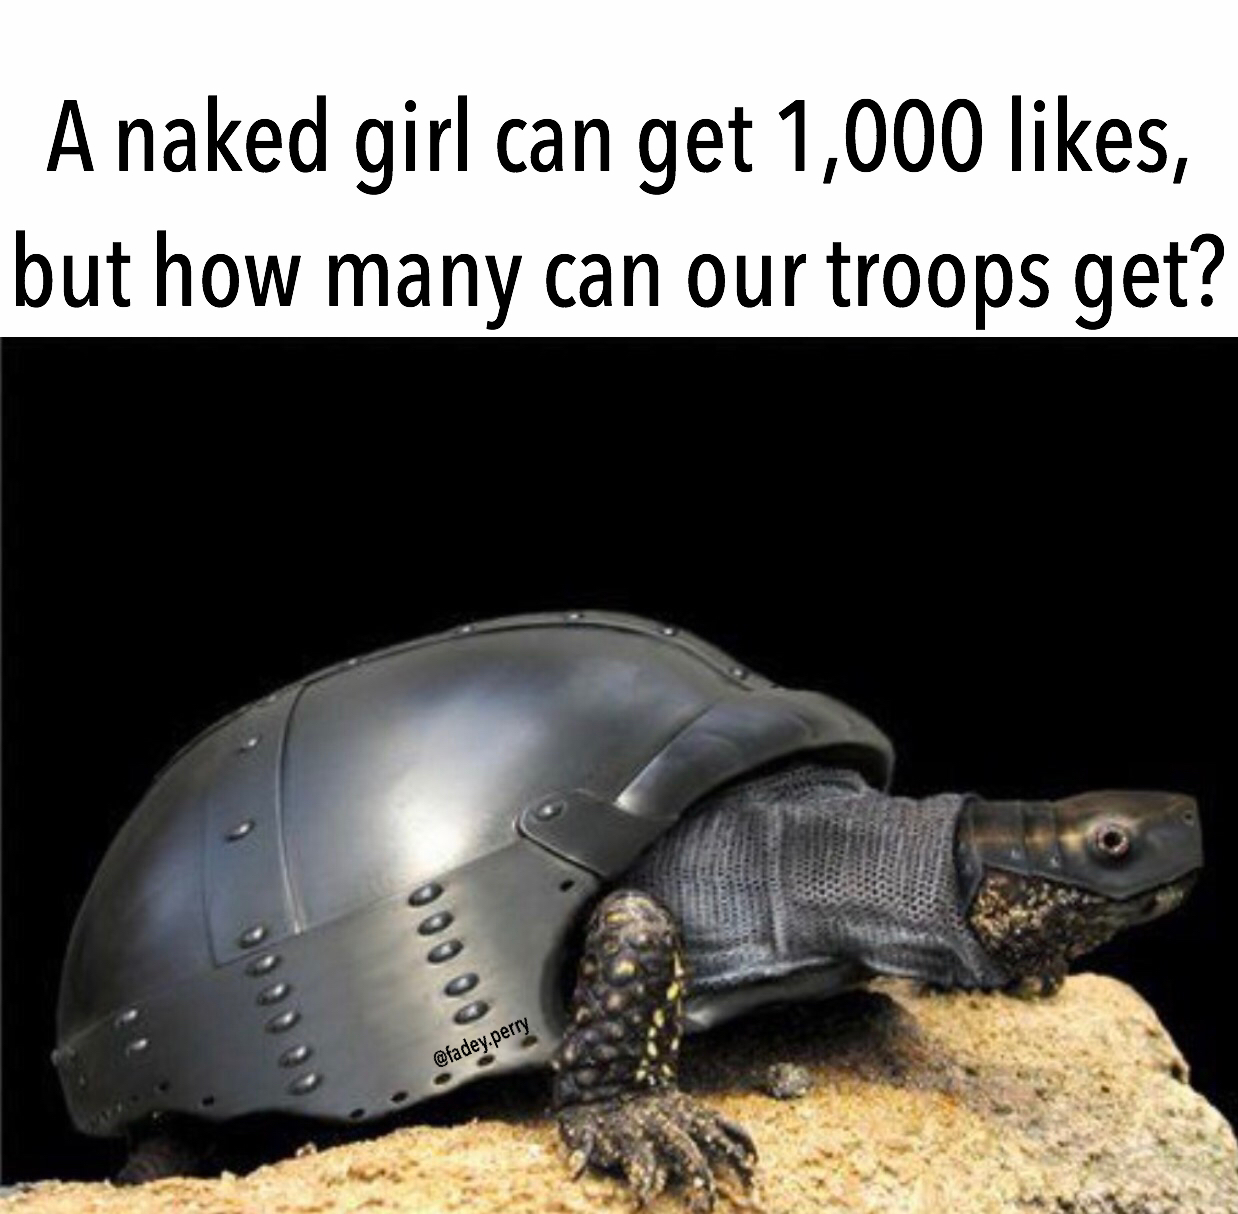 memes - animals with armor - A naked girl can get 1,000 , but how many can our troops get?